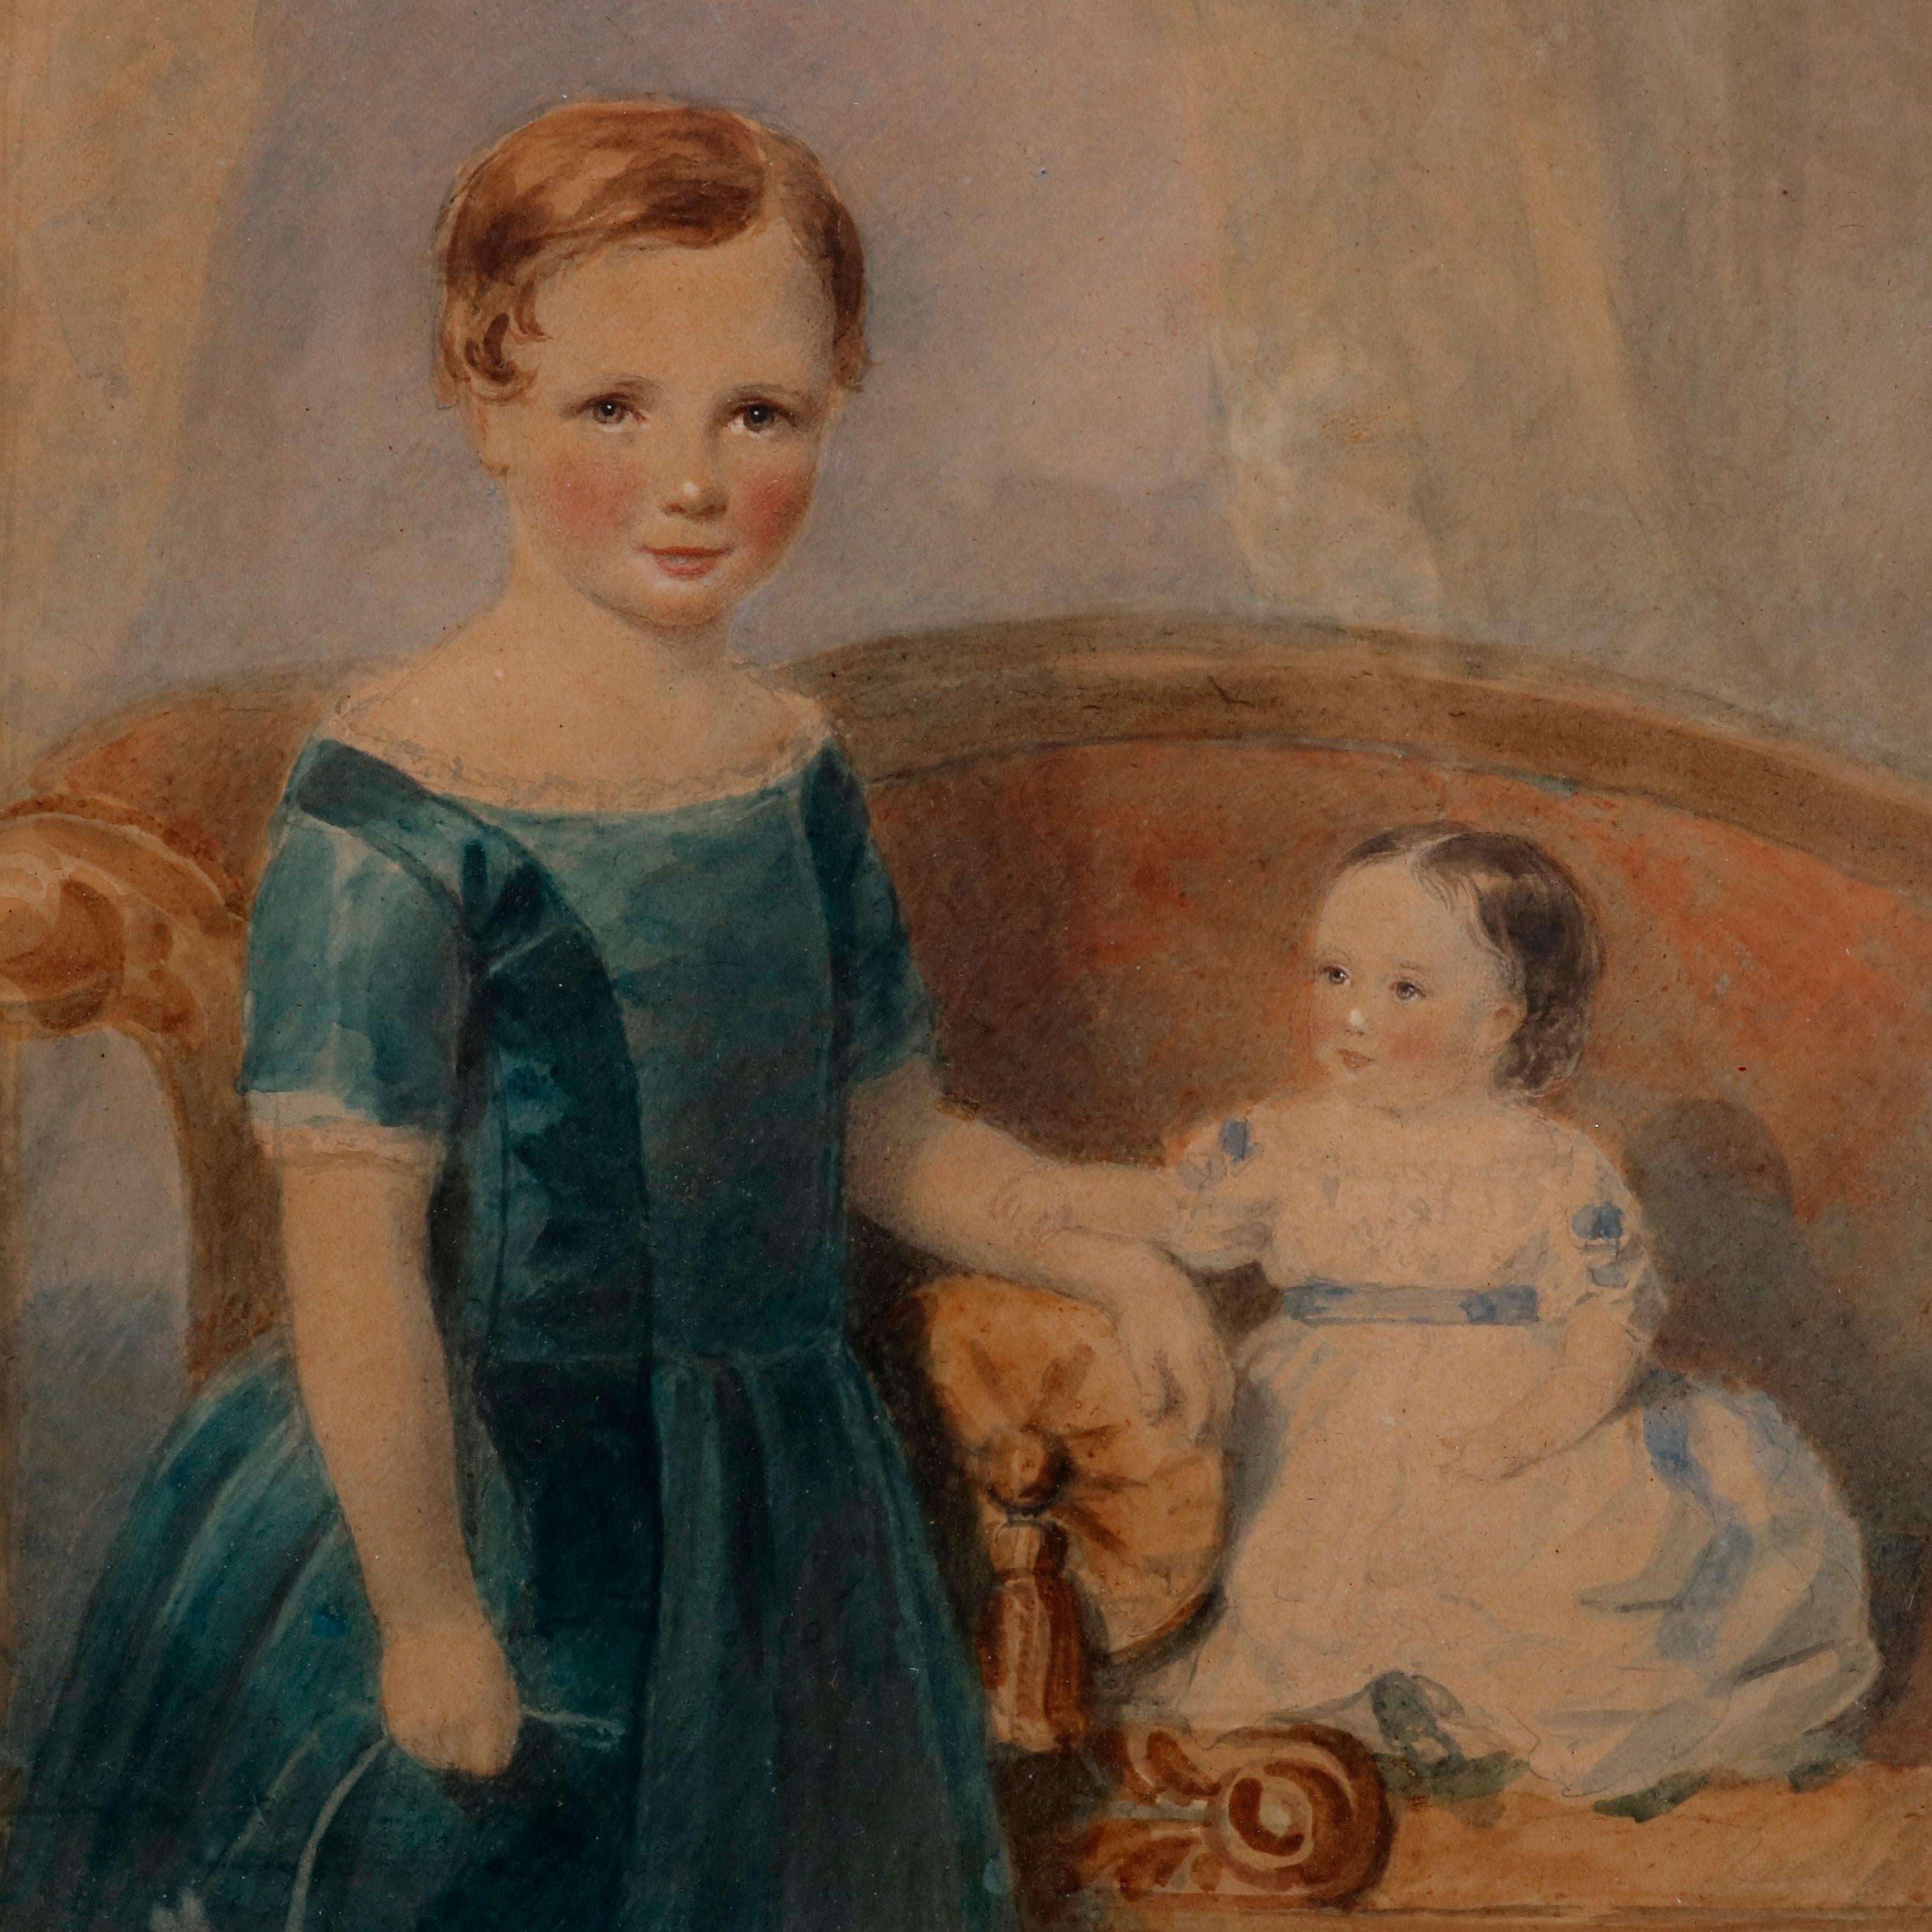 An early American watercolor portrait painting depicts a young siblings in parlor setting 